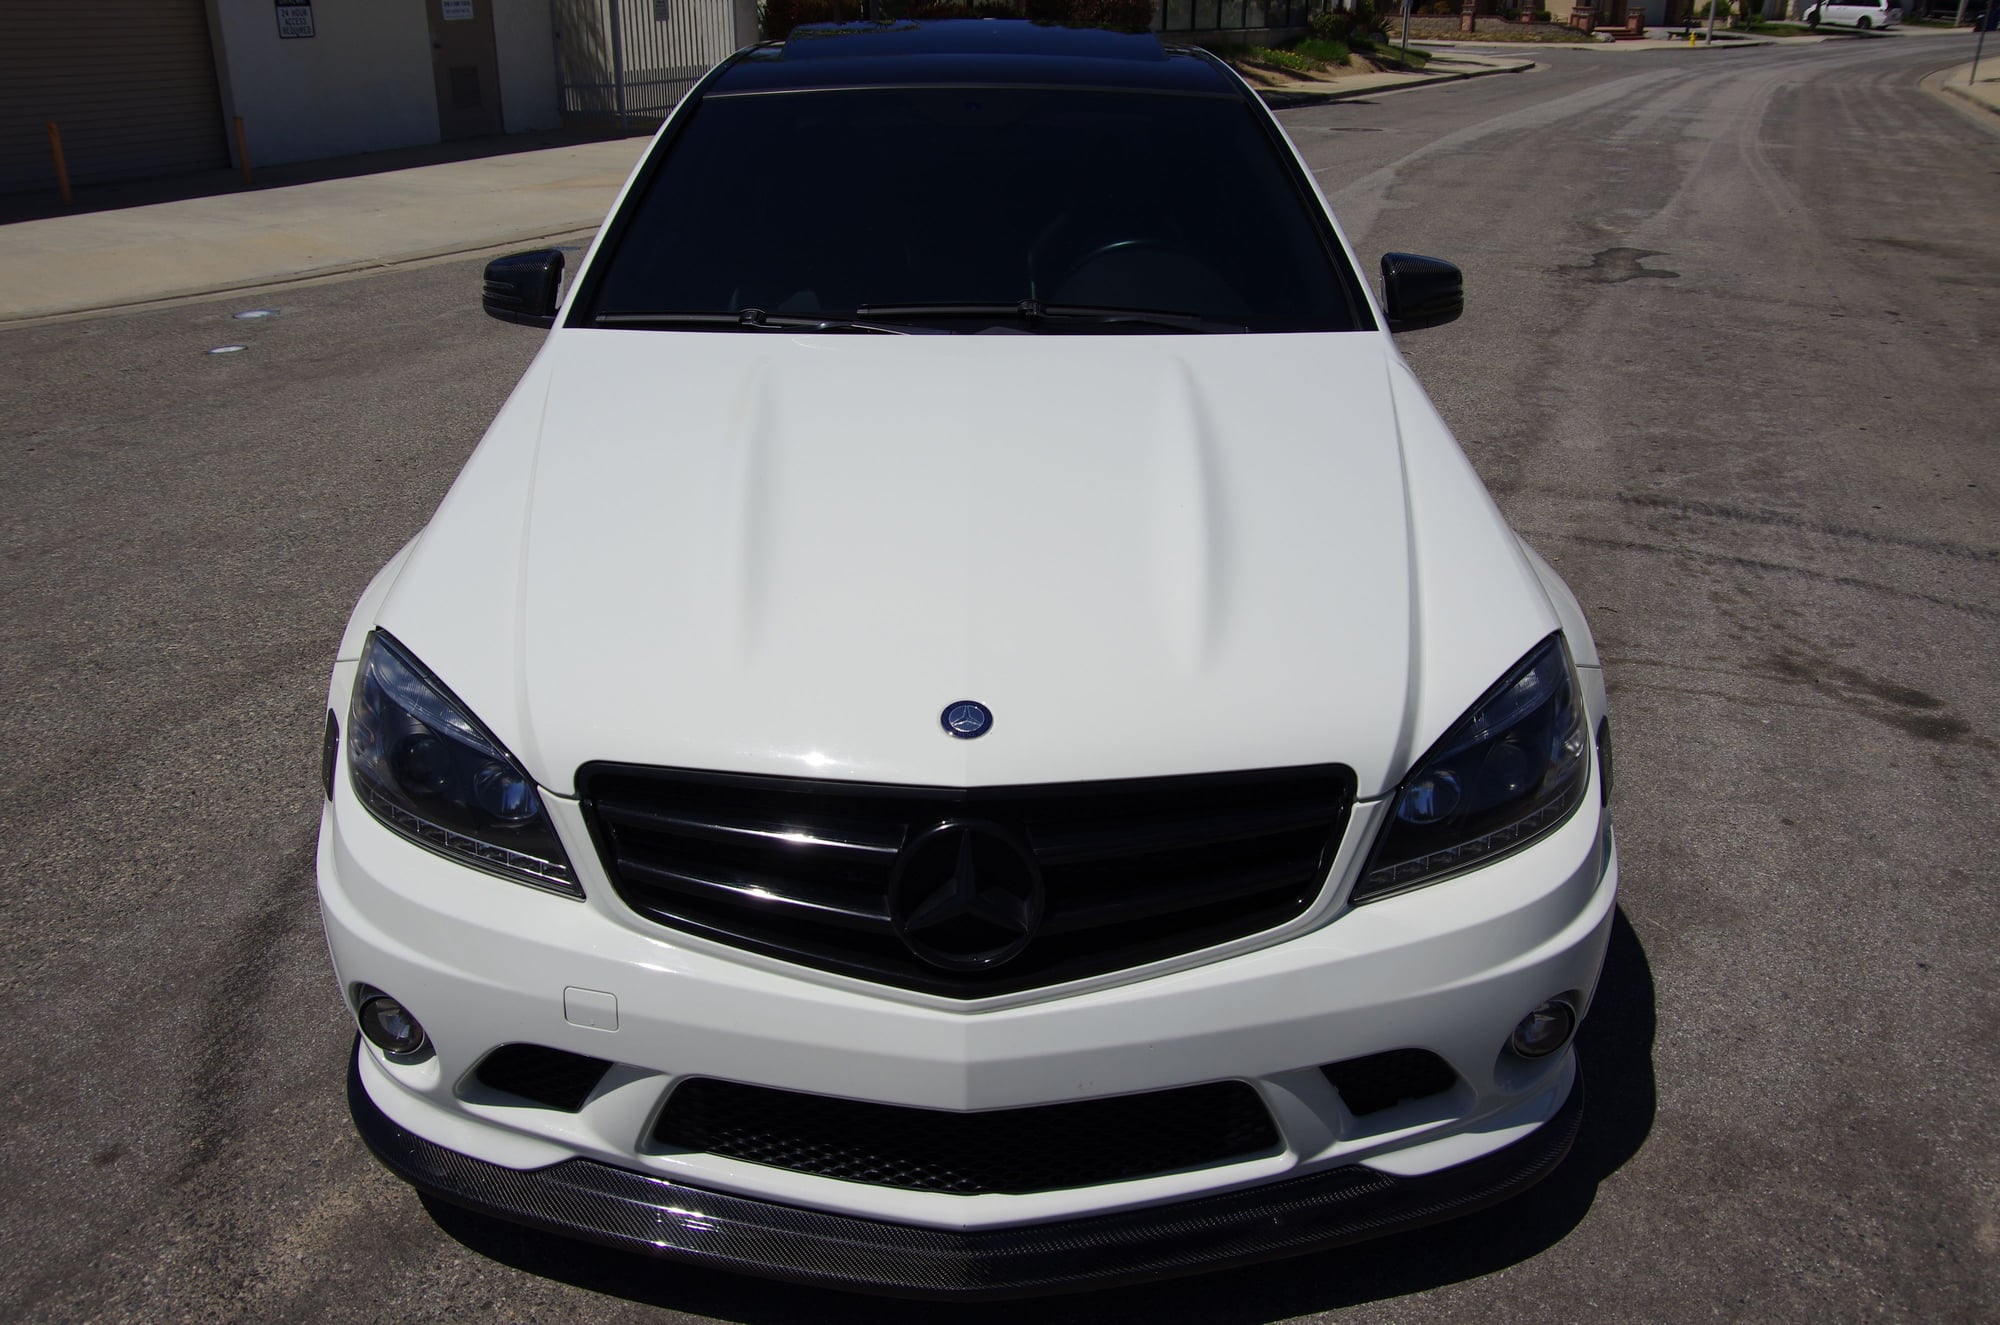 2010 Mercedes-Benz SLK350 - LOOKING FOR QUICK SELL Part Out my C63 AMG - Rowland Heights, CA 91748, United States